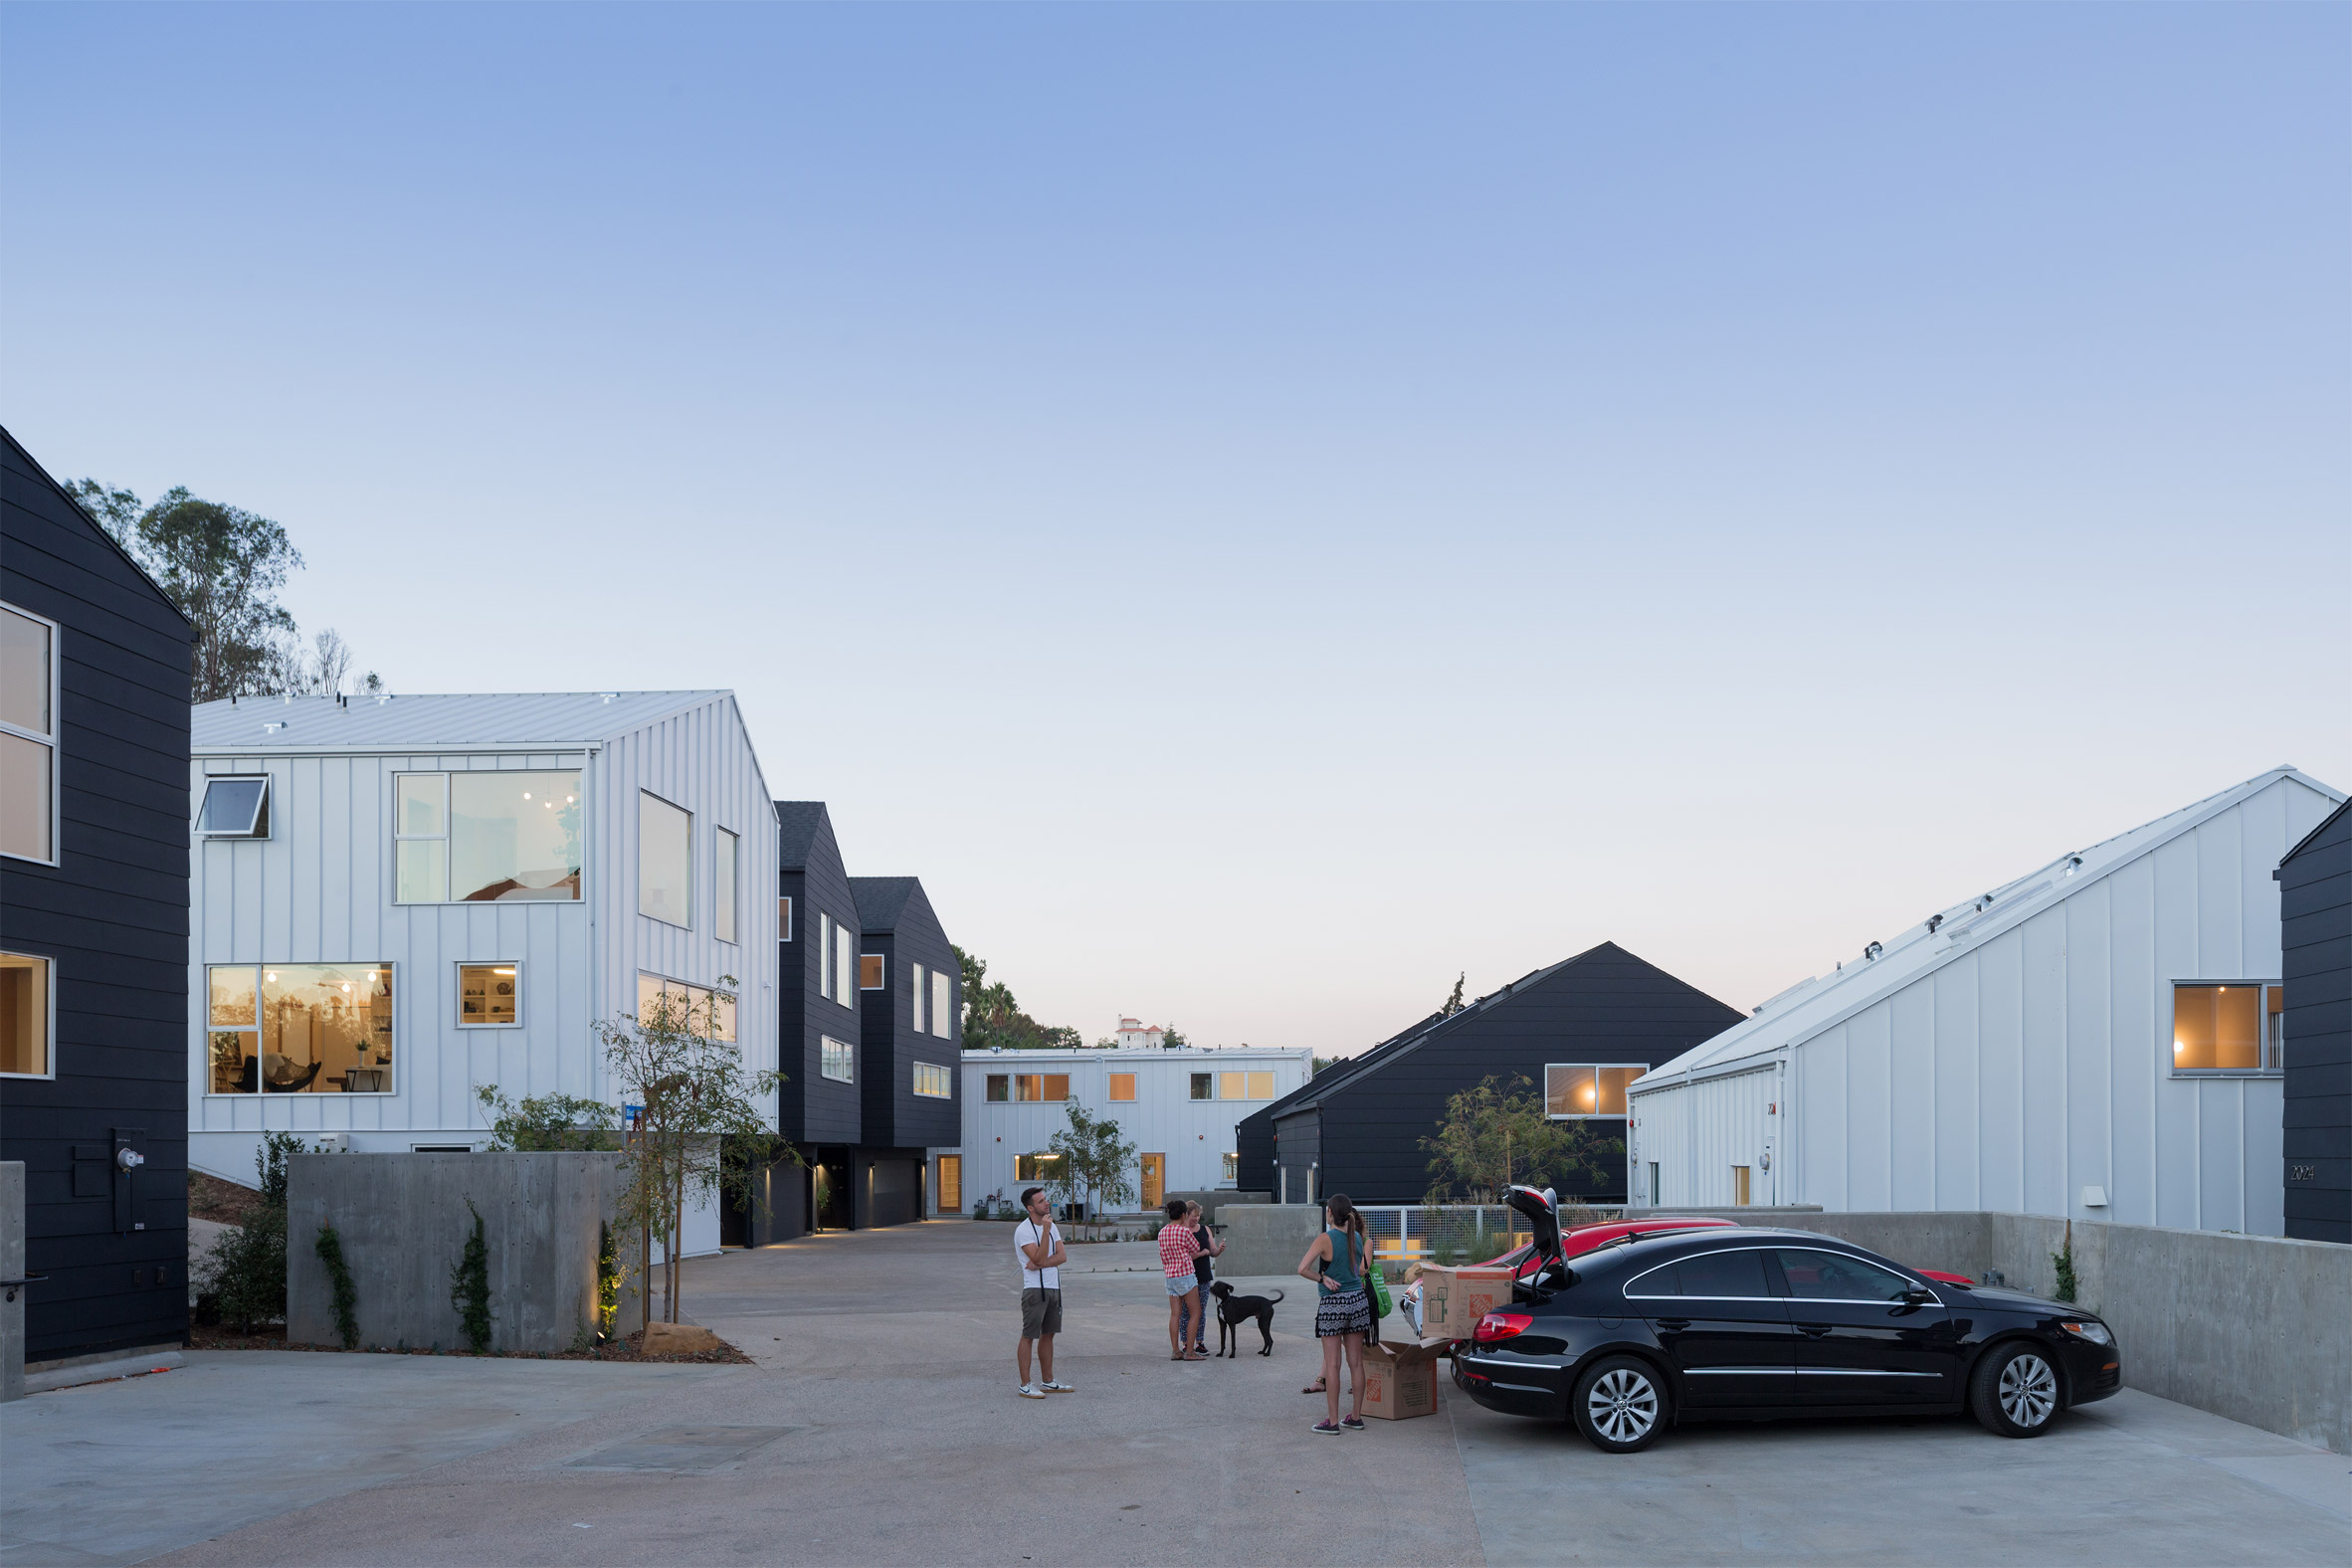 Bestor Architecture creates “high-quality, dense housing” in sprawling Los Angeles